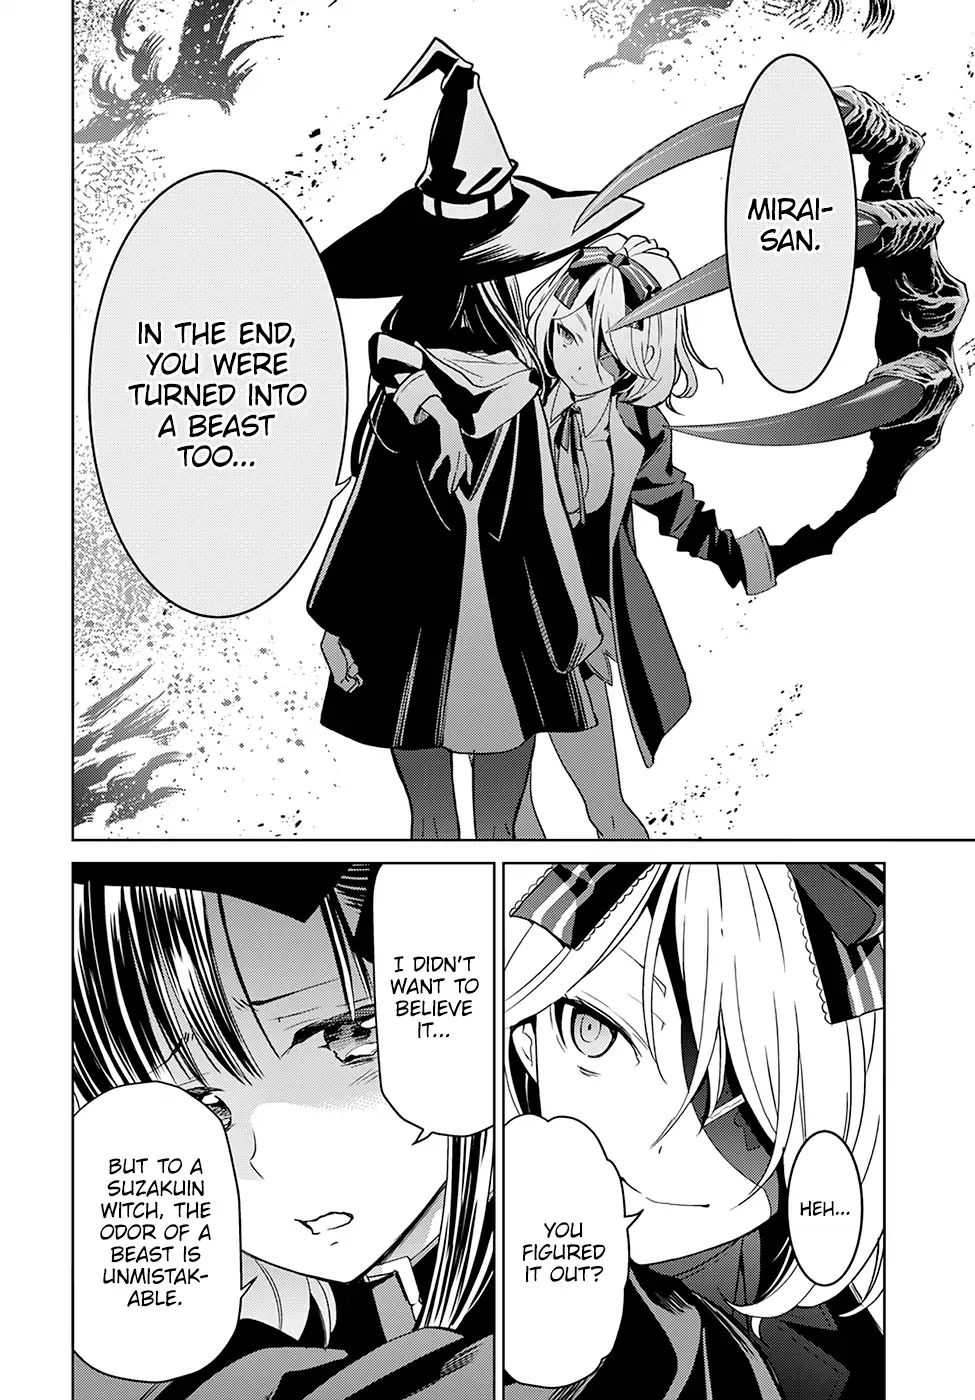 Witch Order Chapter 4: Suzakuin Engi’s Justice